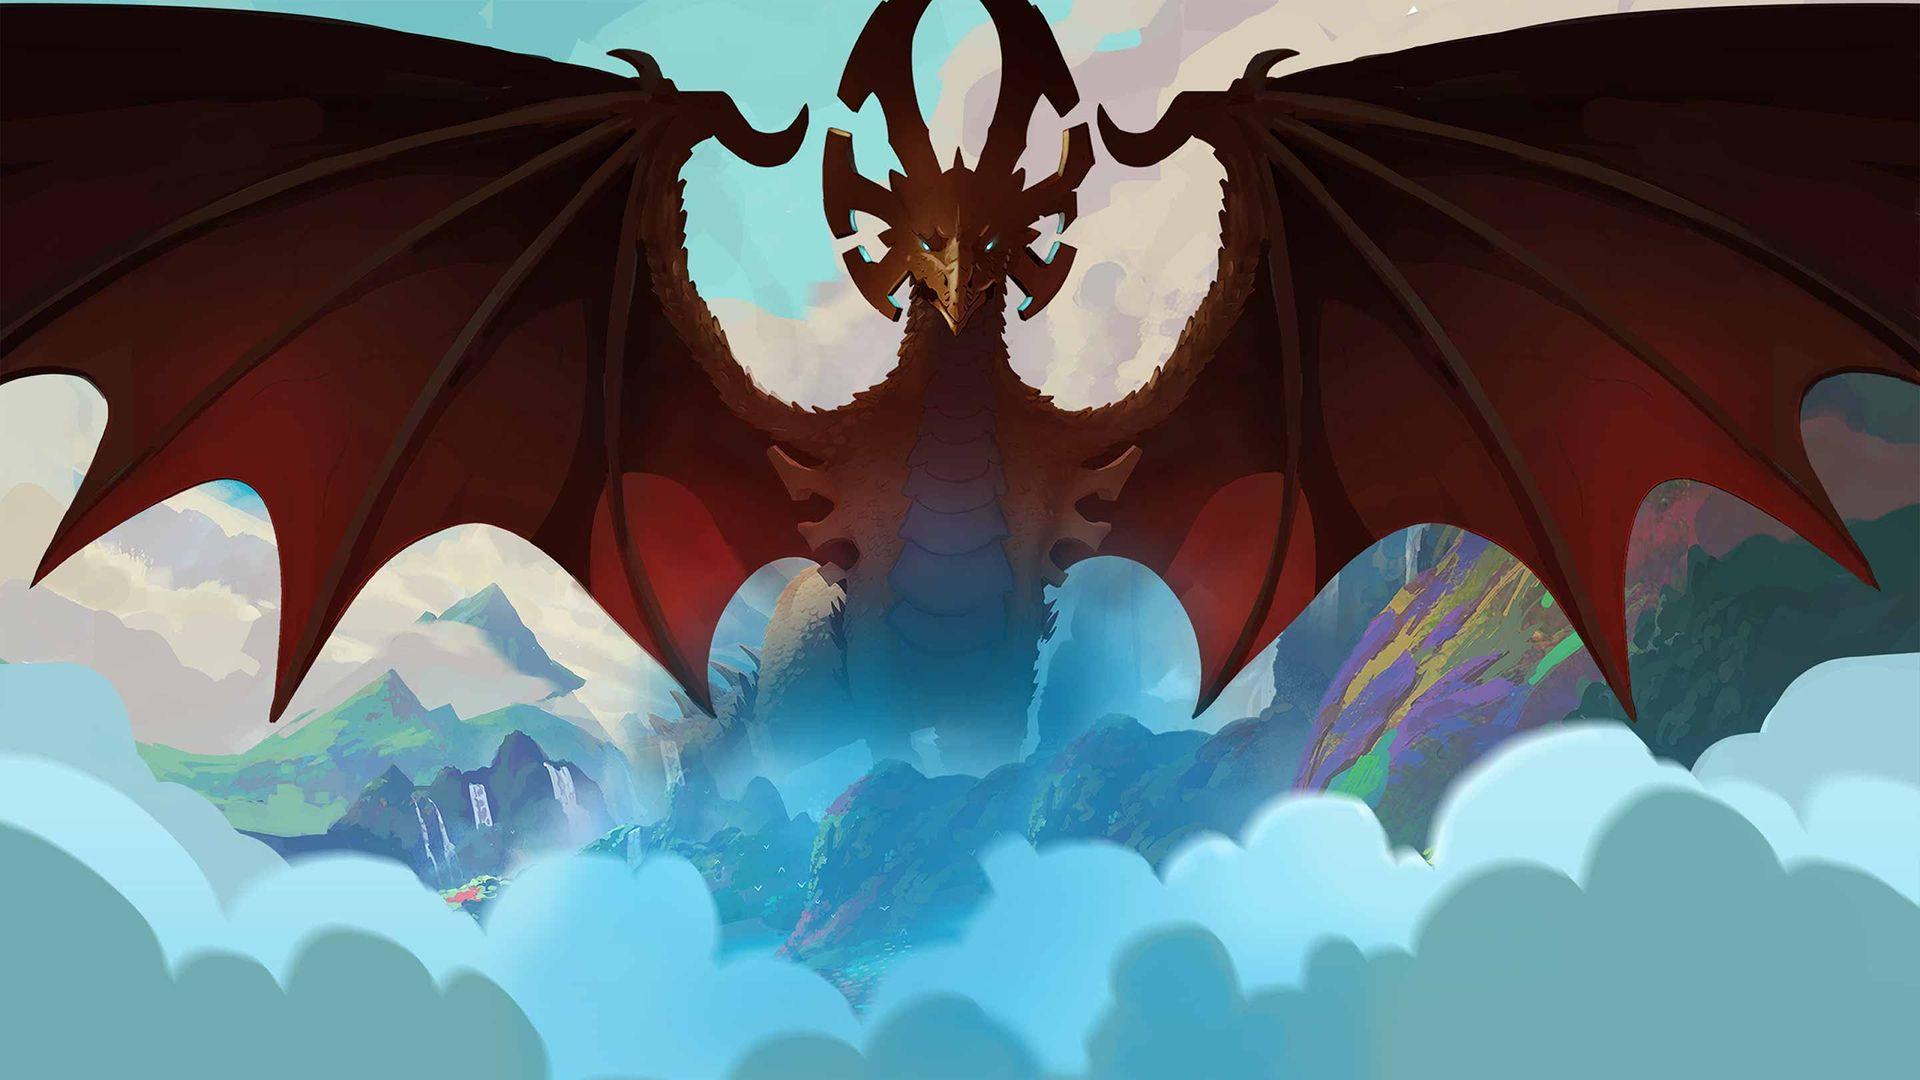 Lost this Dragon Prince wallpaper  Help  rTheDragonPrince